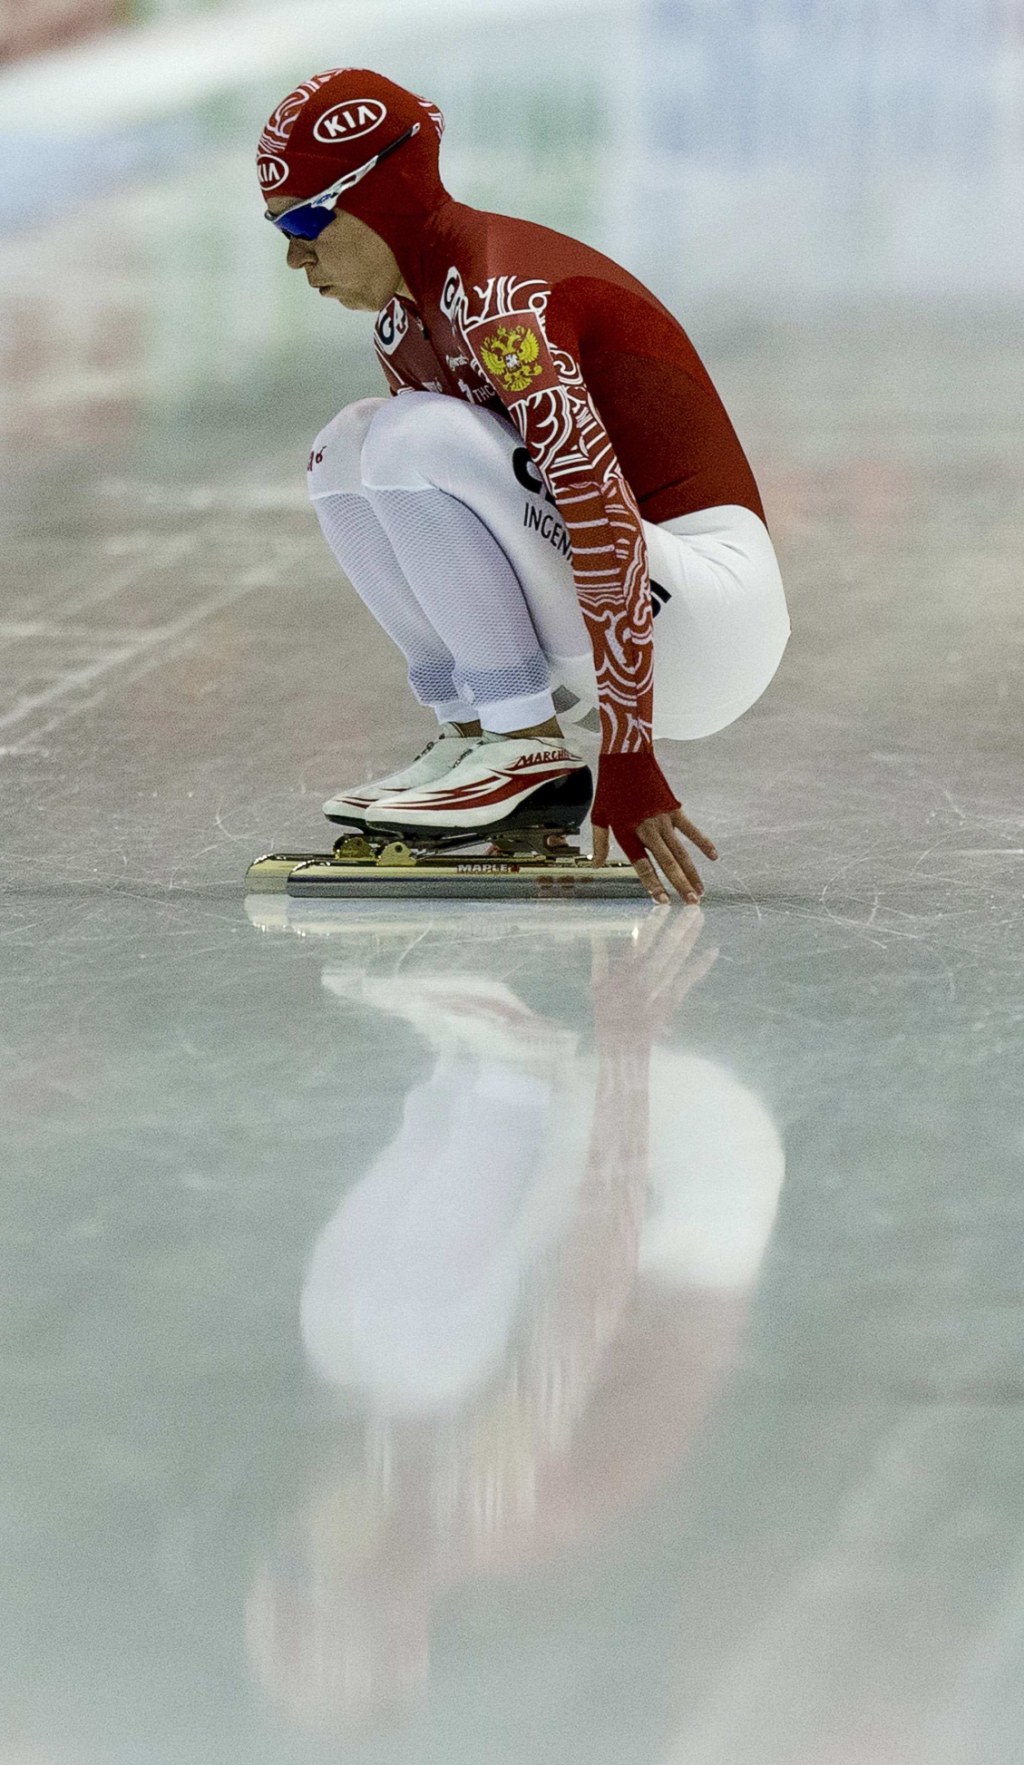 Graf of Russia warms up before the women's 5000 metres event фото (photo)